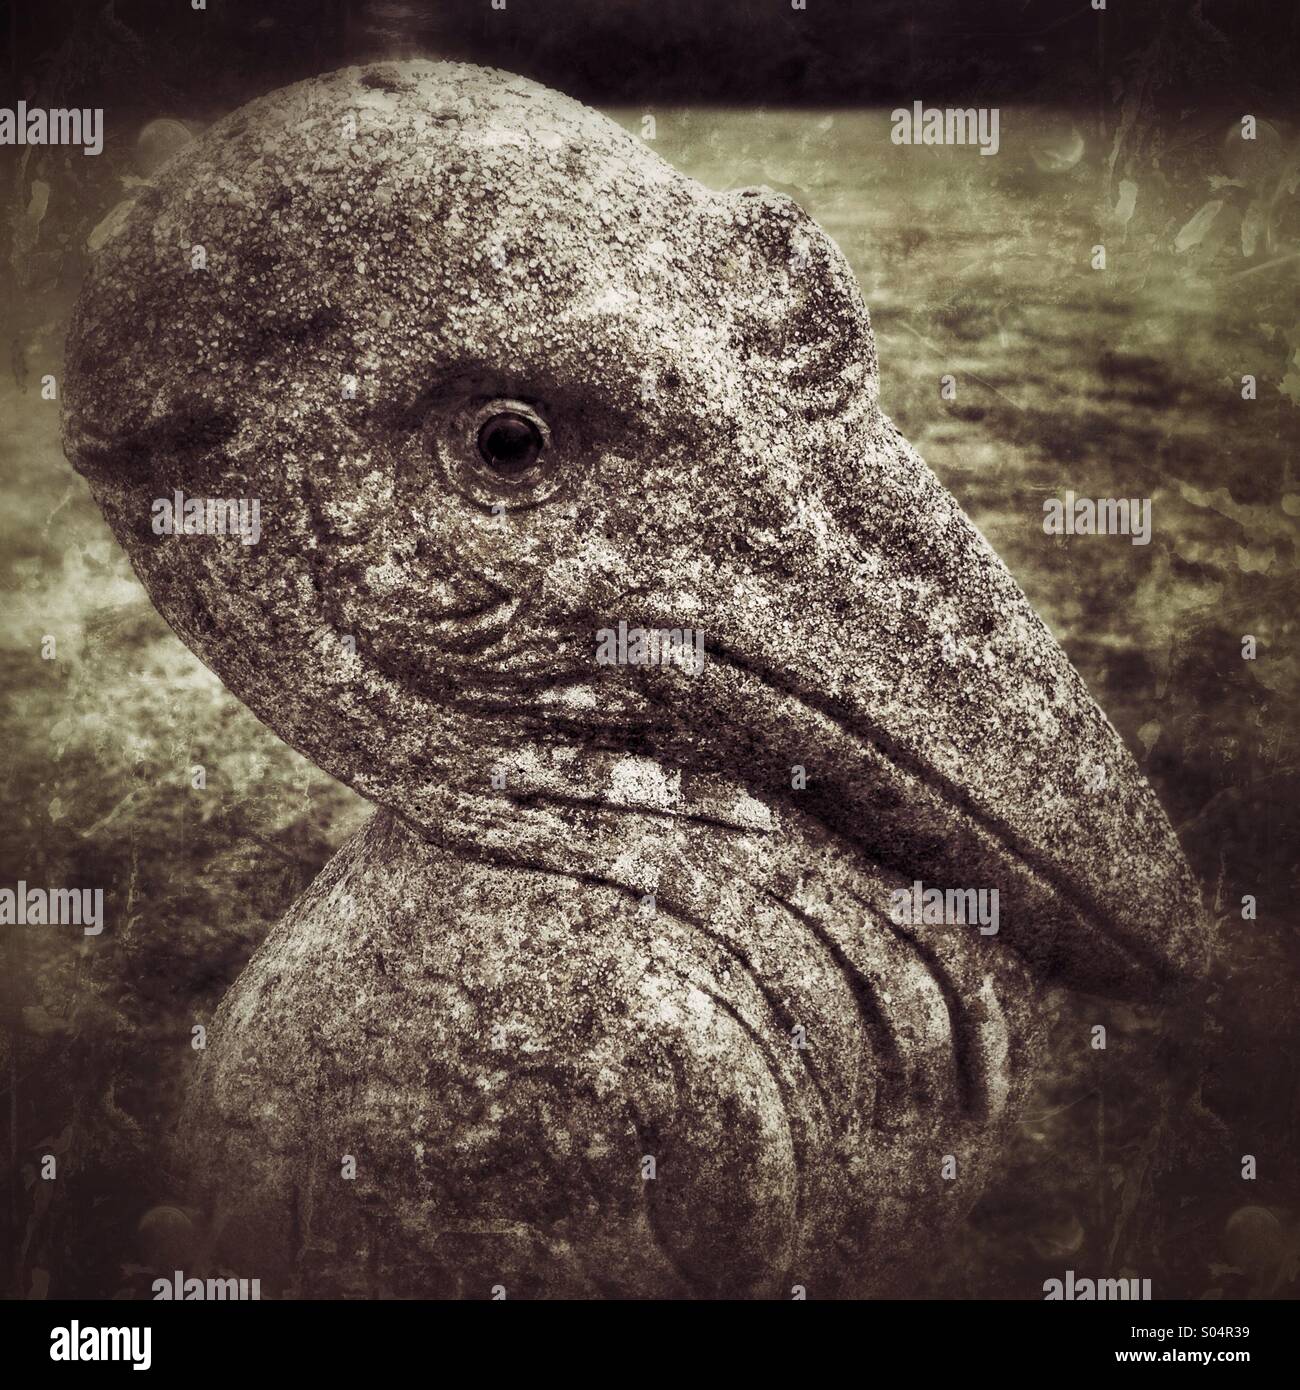 Stone garden sculpture of a pelican with grunge texture Stock Photo